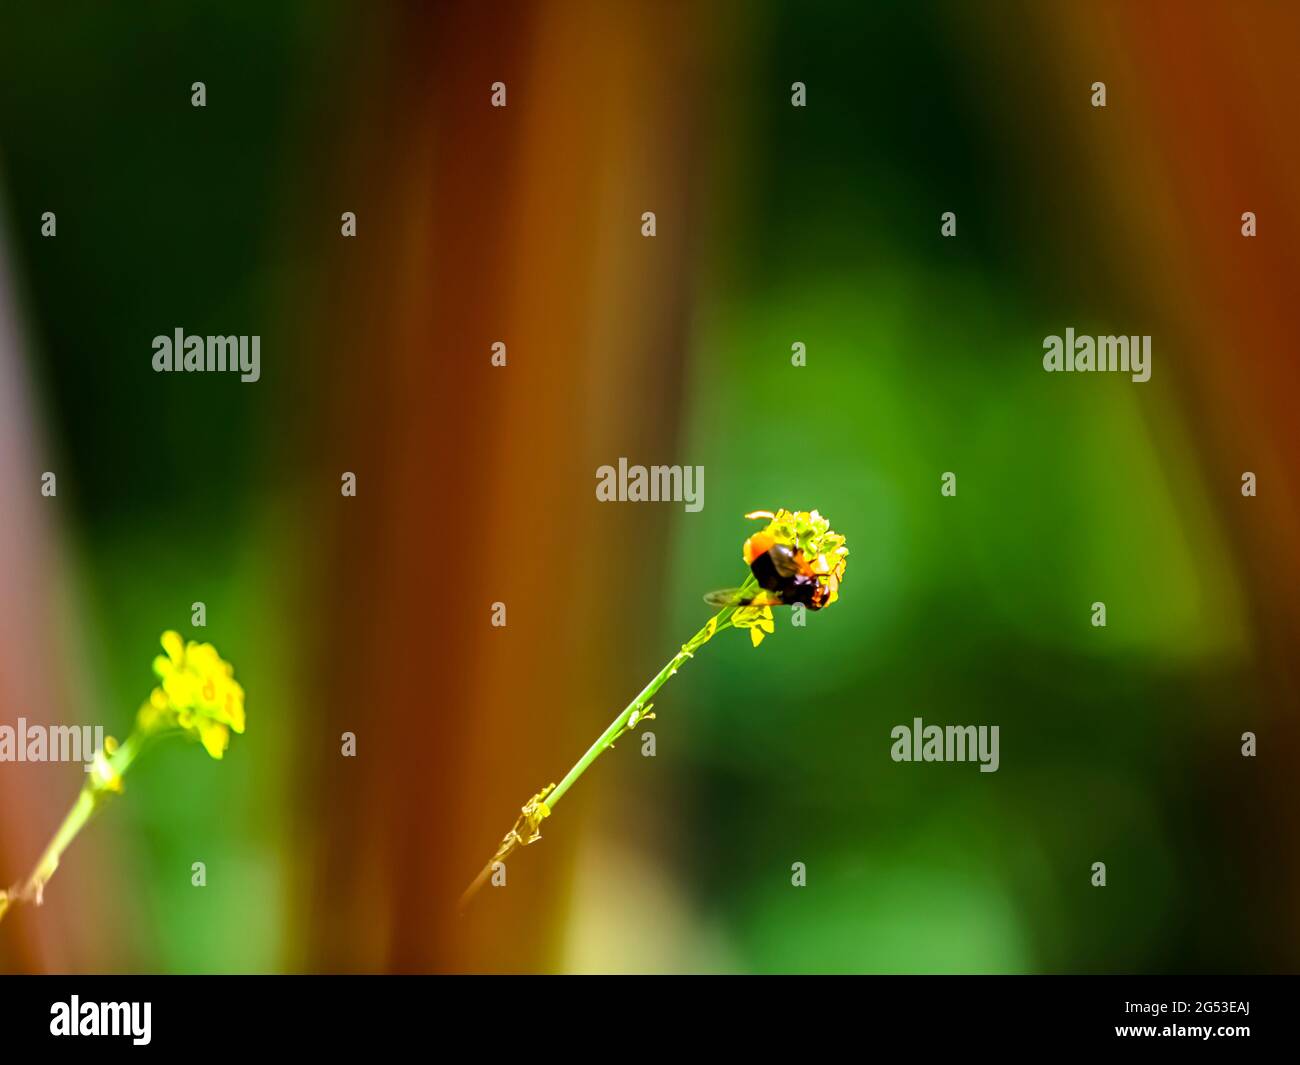 A beautiful bee on a yellow flower with a green blurred natural background Stock Photo